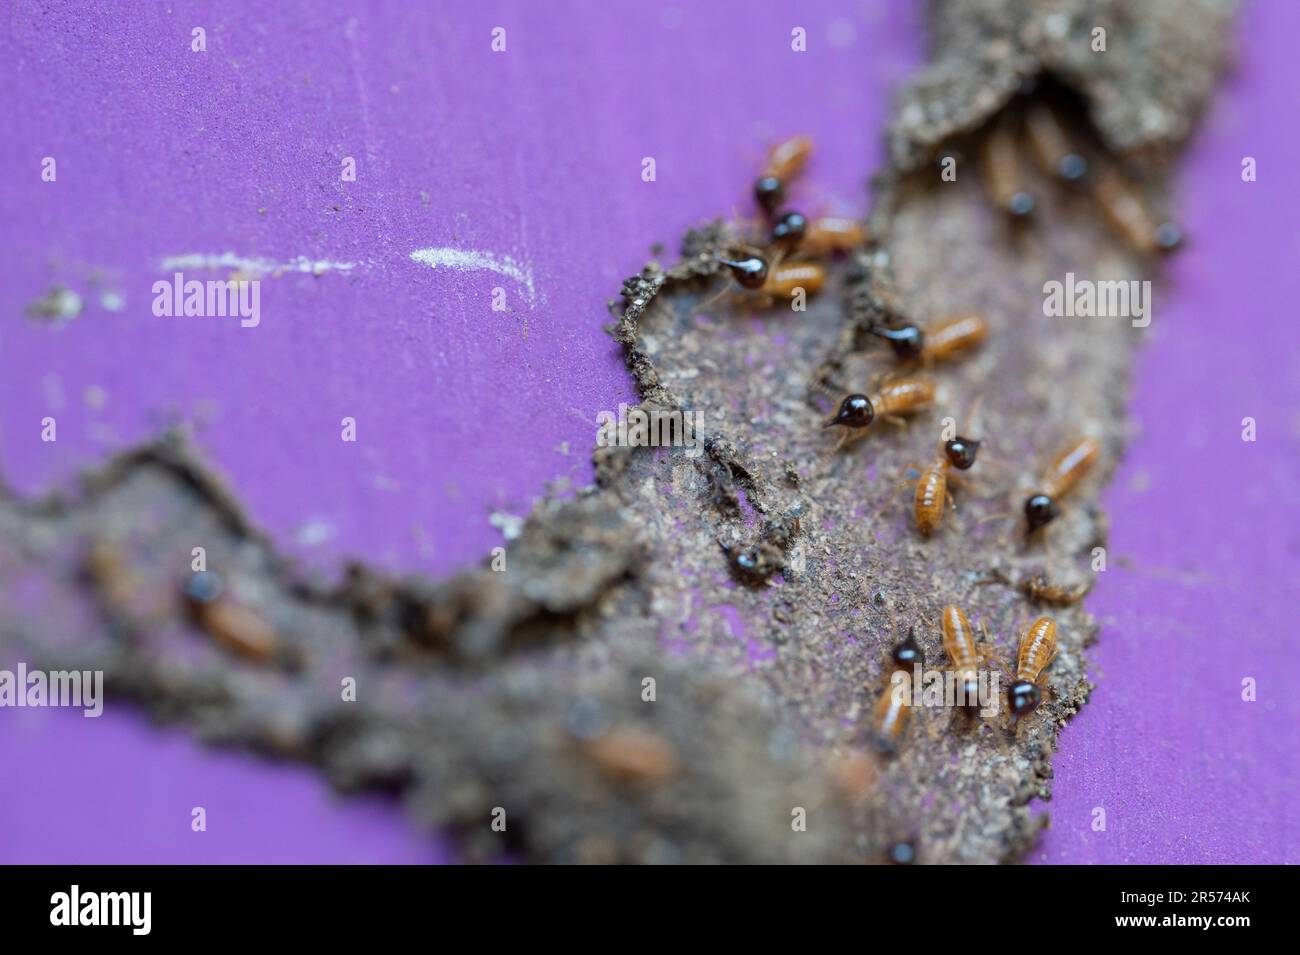 Group of termites insect with black heads close up view Stock Photo